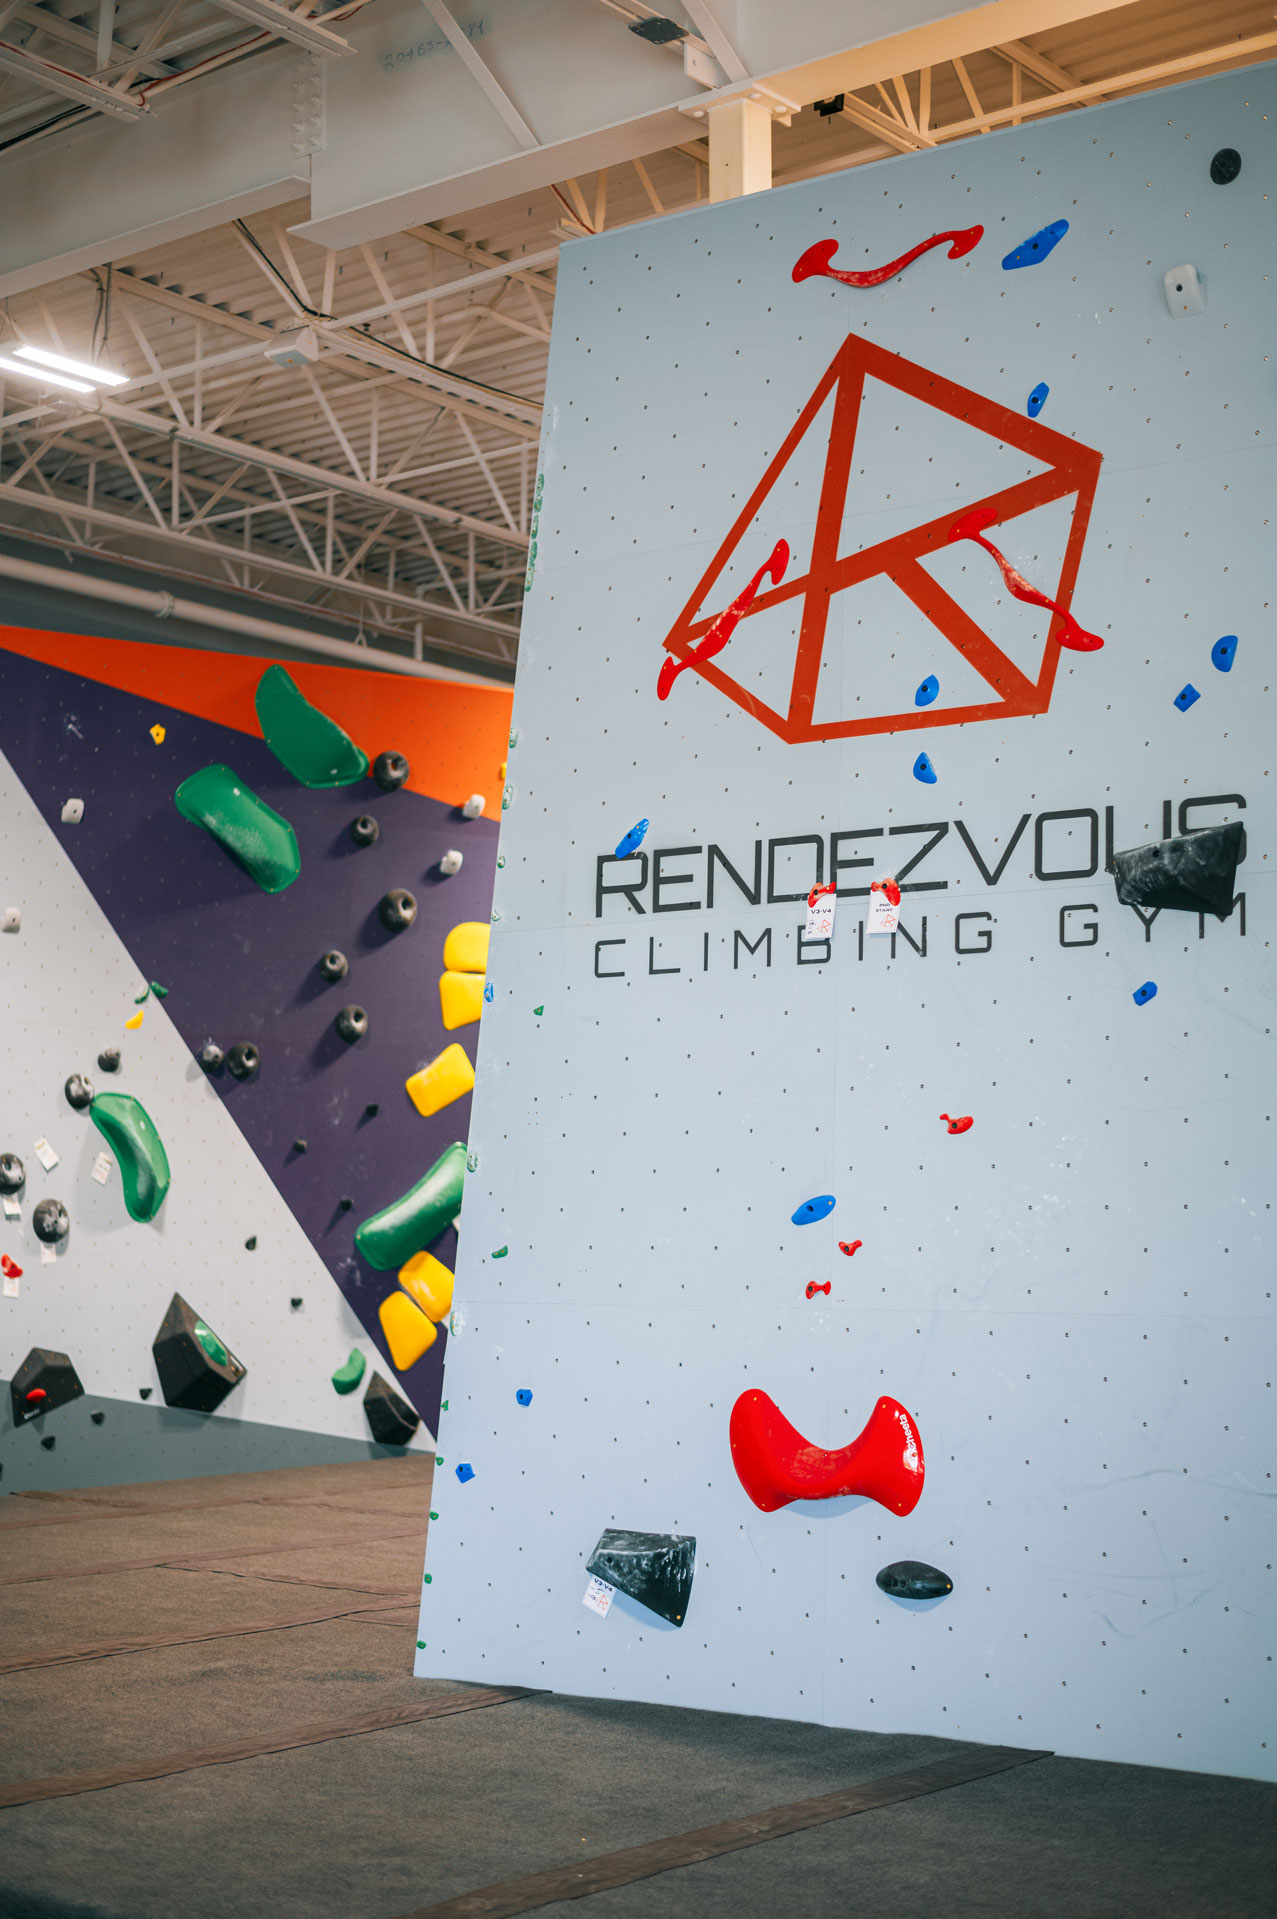 Rendezvous logo in the gym